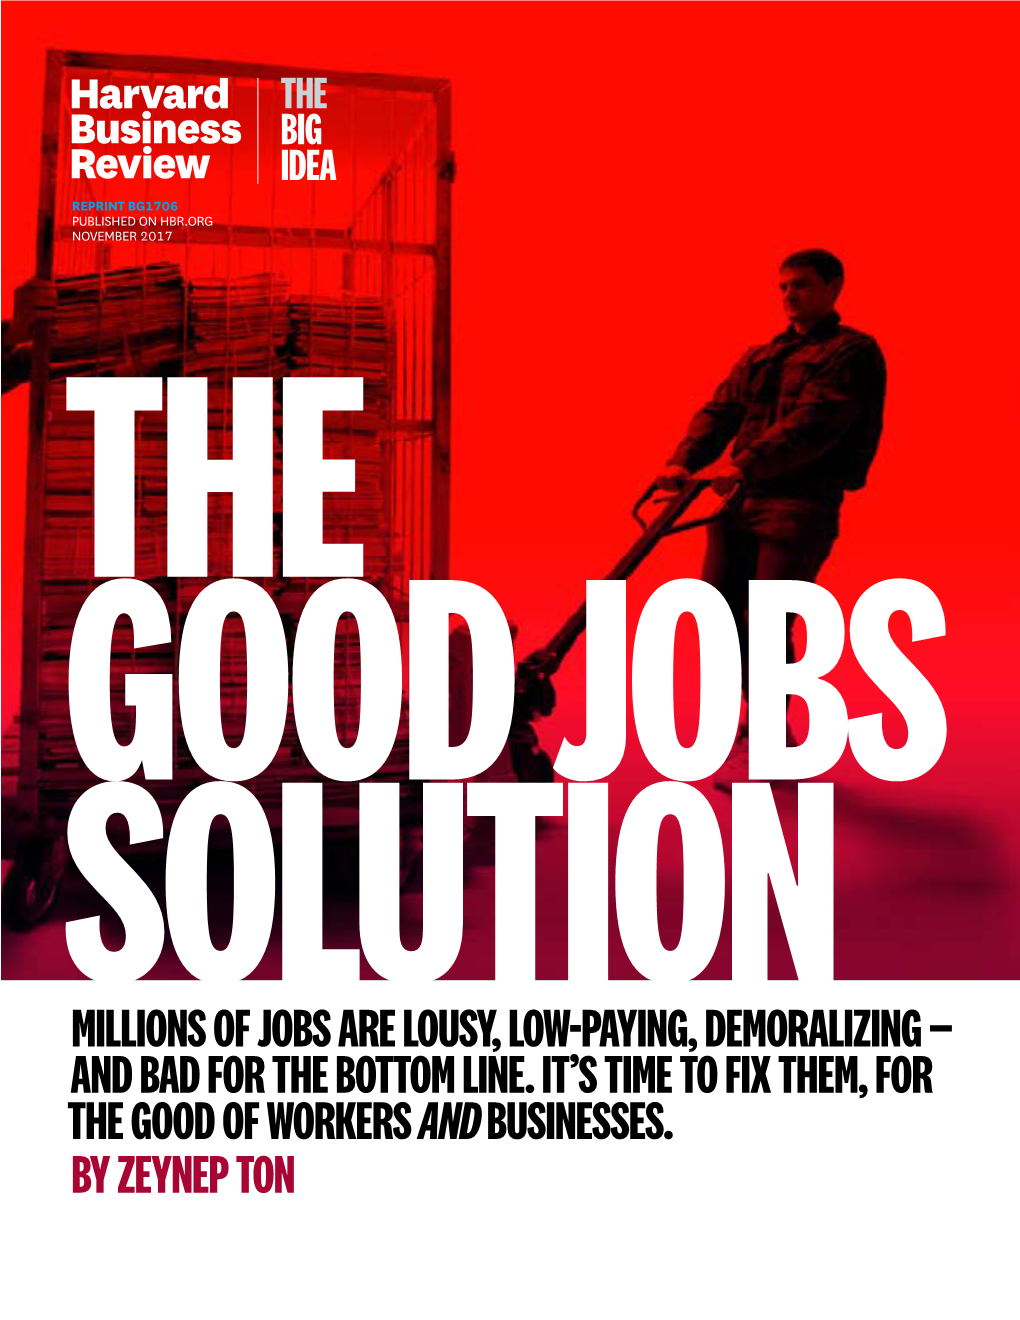 The Good Jobs Solution Millions of Jobs Are Lousy, Low-Paying, Demoralizing — and Bad for the Bottom Line